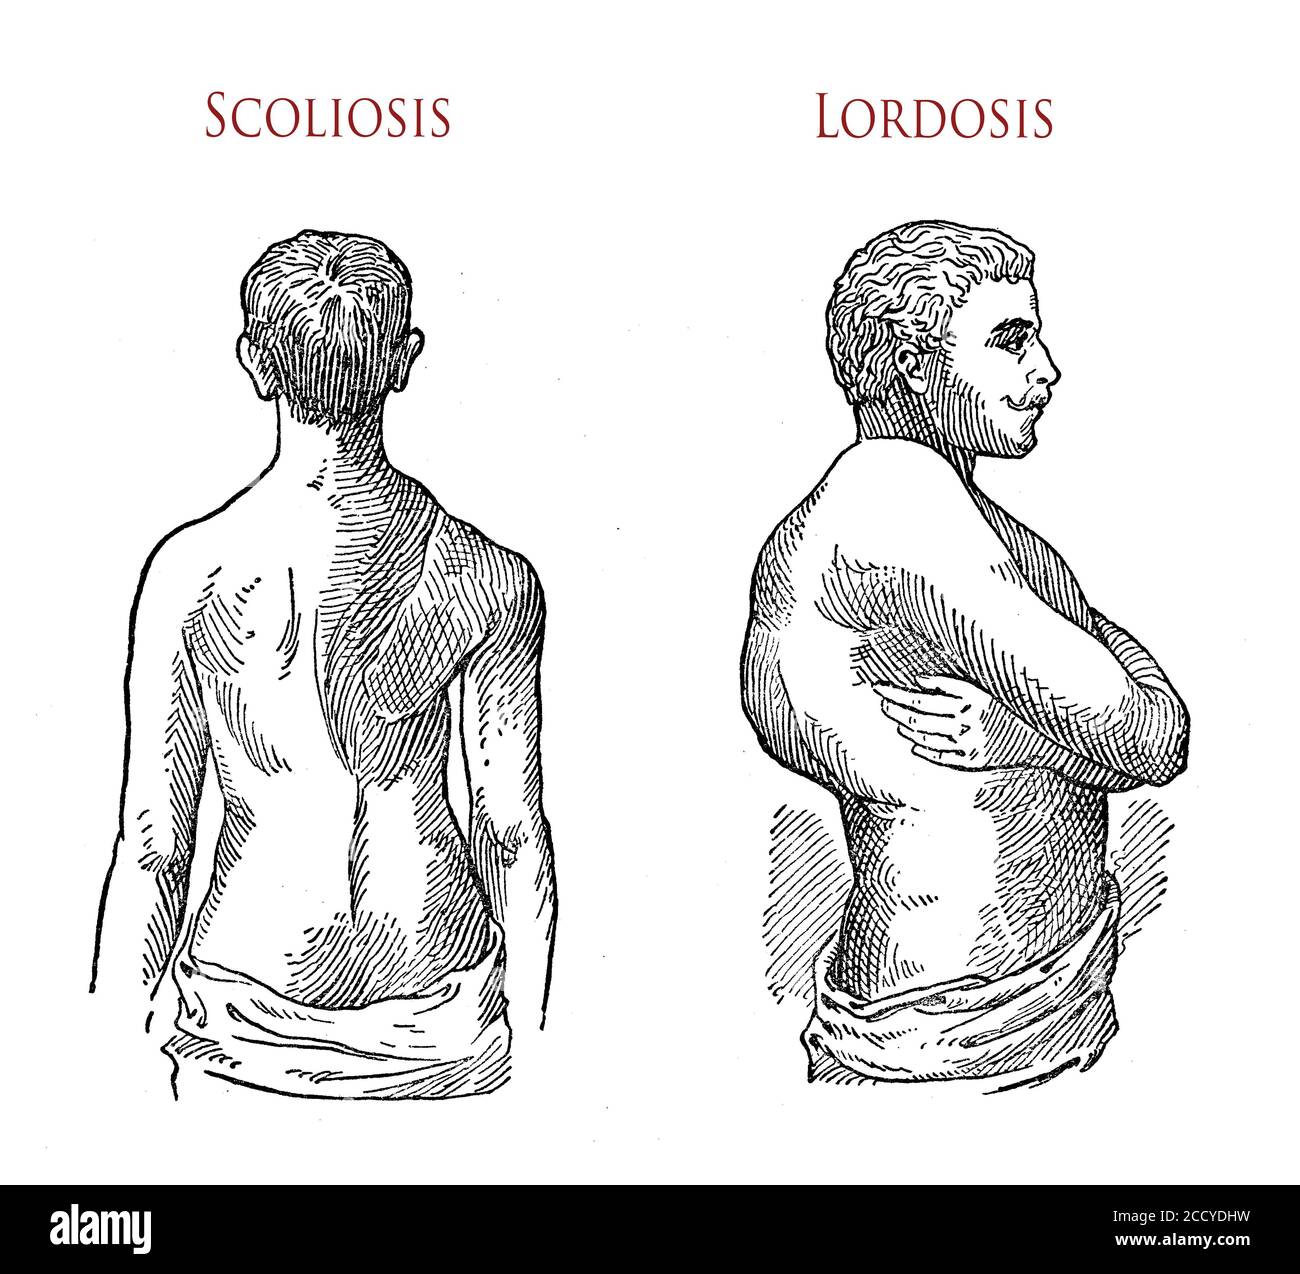 Healthcare and orthopedics: male patients affected by scoliosis (person's spine with a sideways curve) and lordosis (abnormal inward or swayback curvature of the lumbar spine) Stock Photo